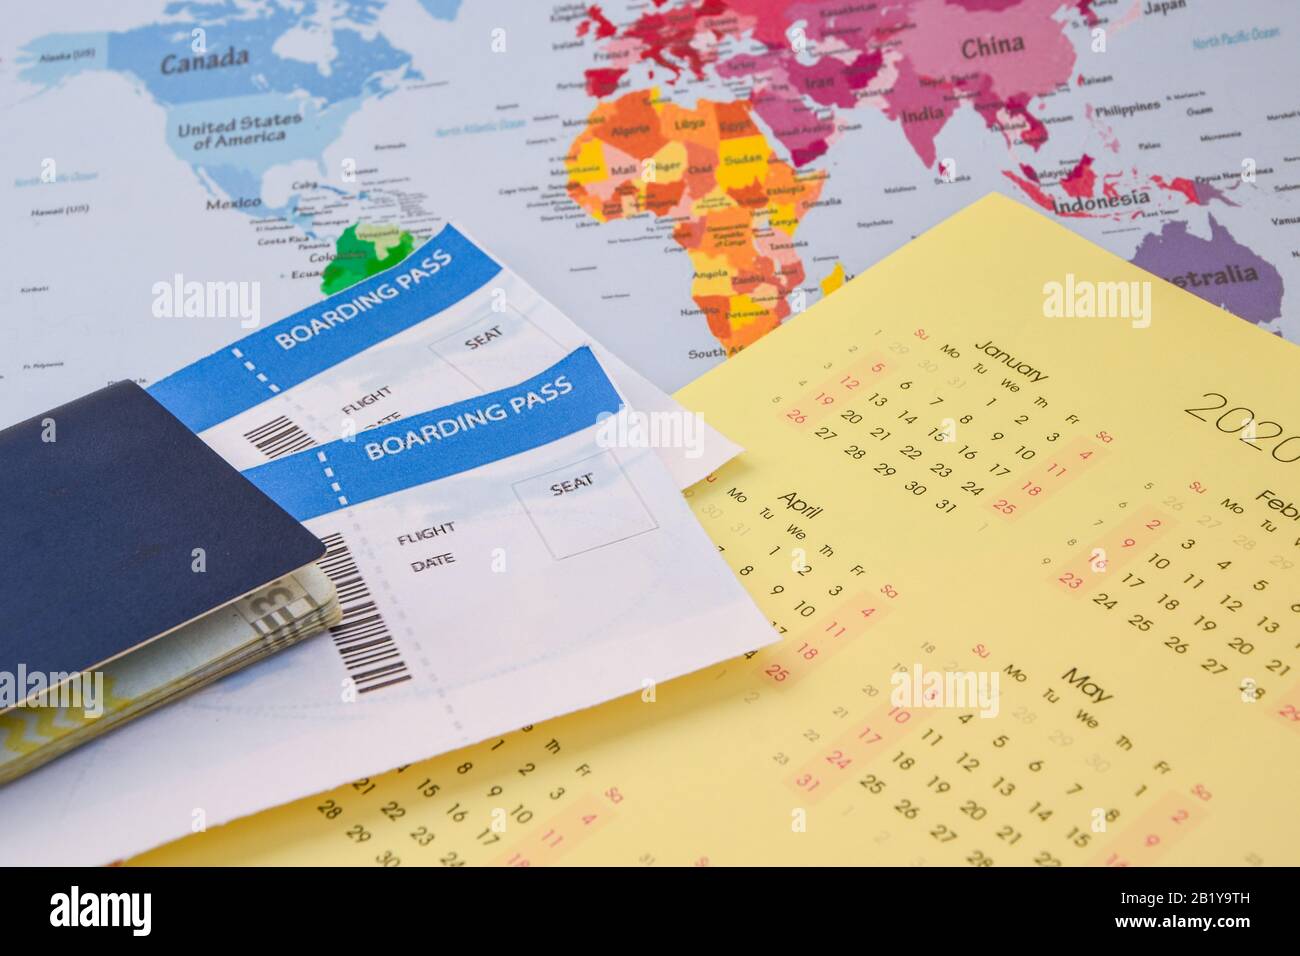 passport, boarding pass over map. travel concept., on calendar with pins Passport on map ticket, planning trip Stock Photo